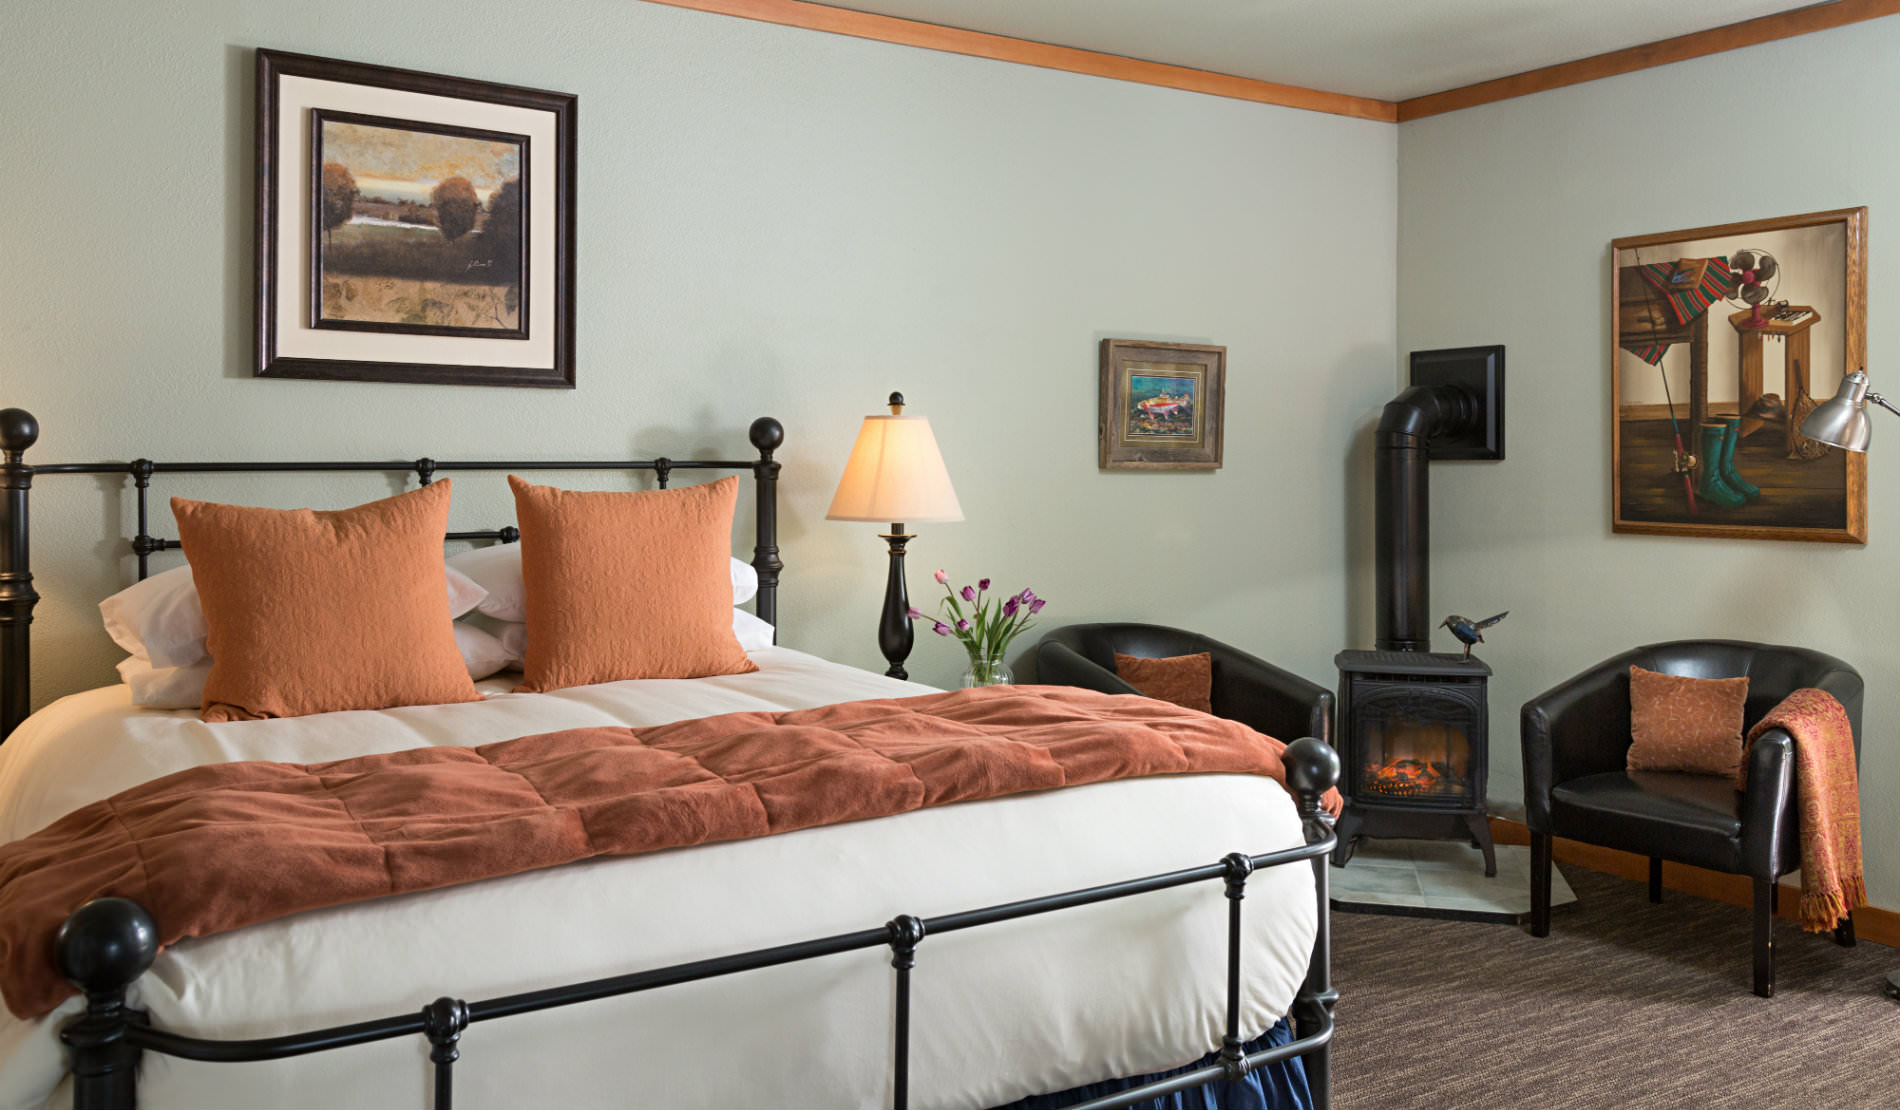 Large iron bedstand with soft rust and white bedding, two chairs beside wood burning stove.